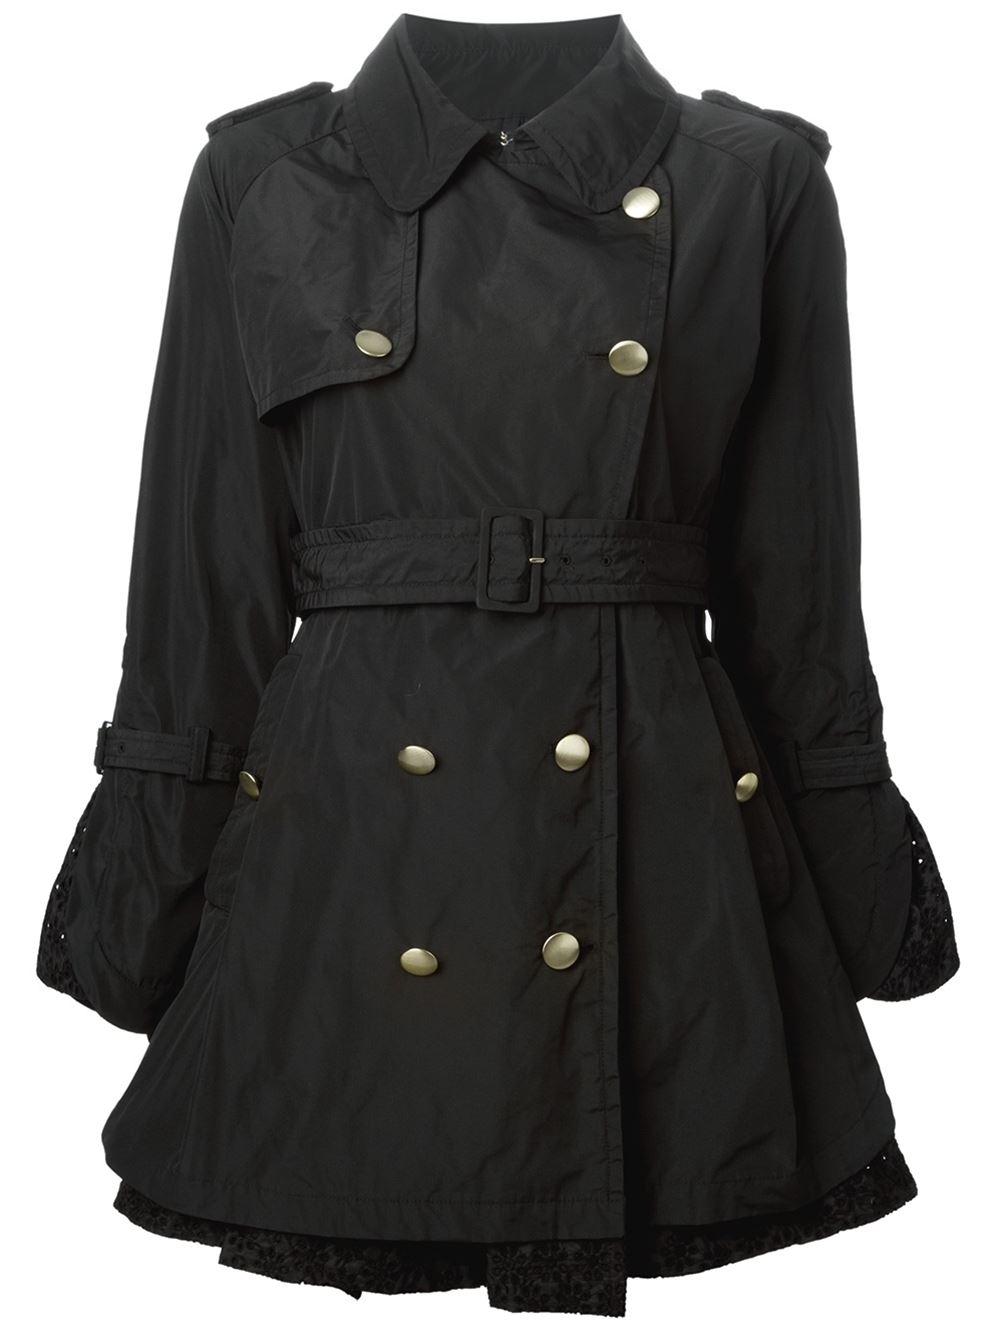 Moncler Macrame Trench Coat in Black | Lyst